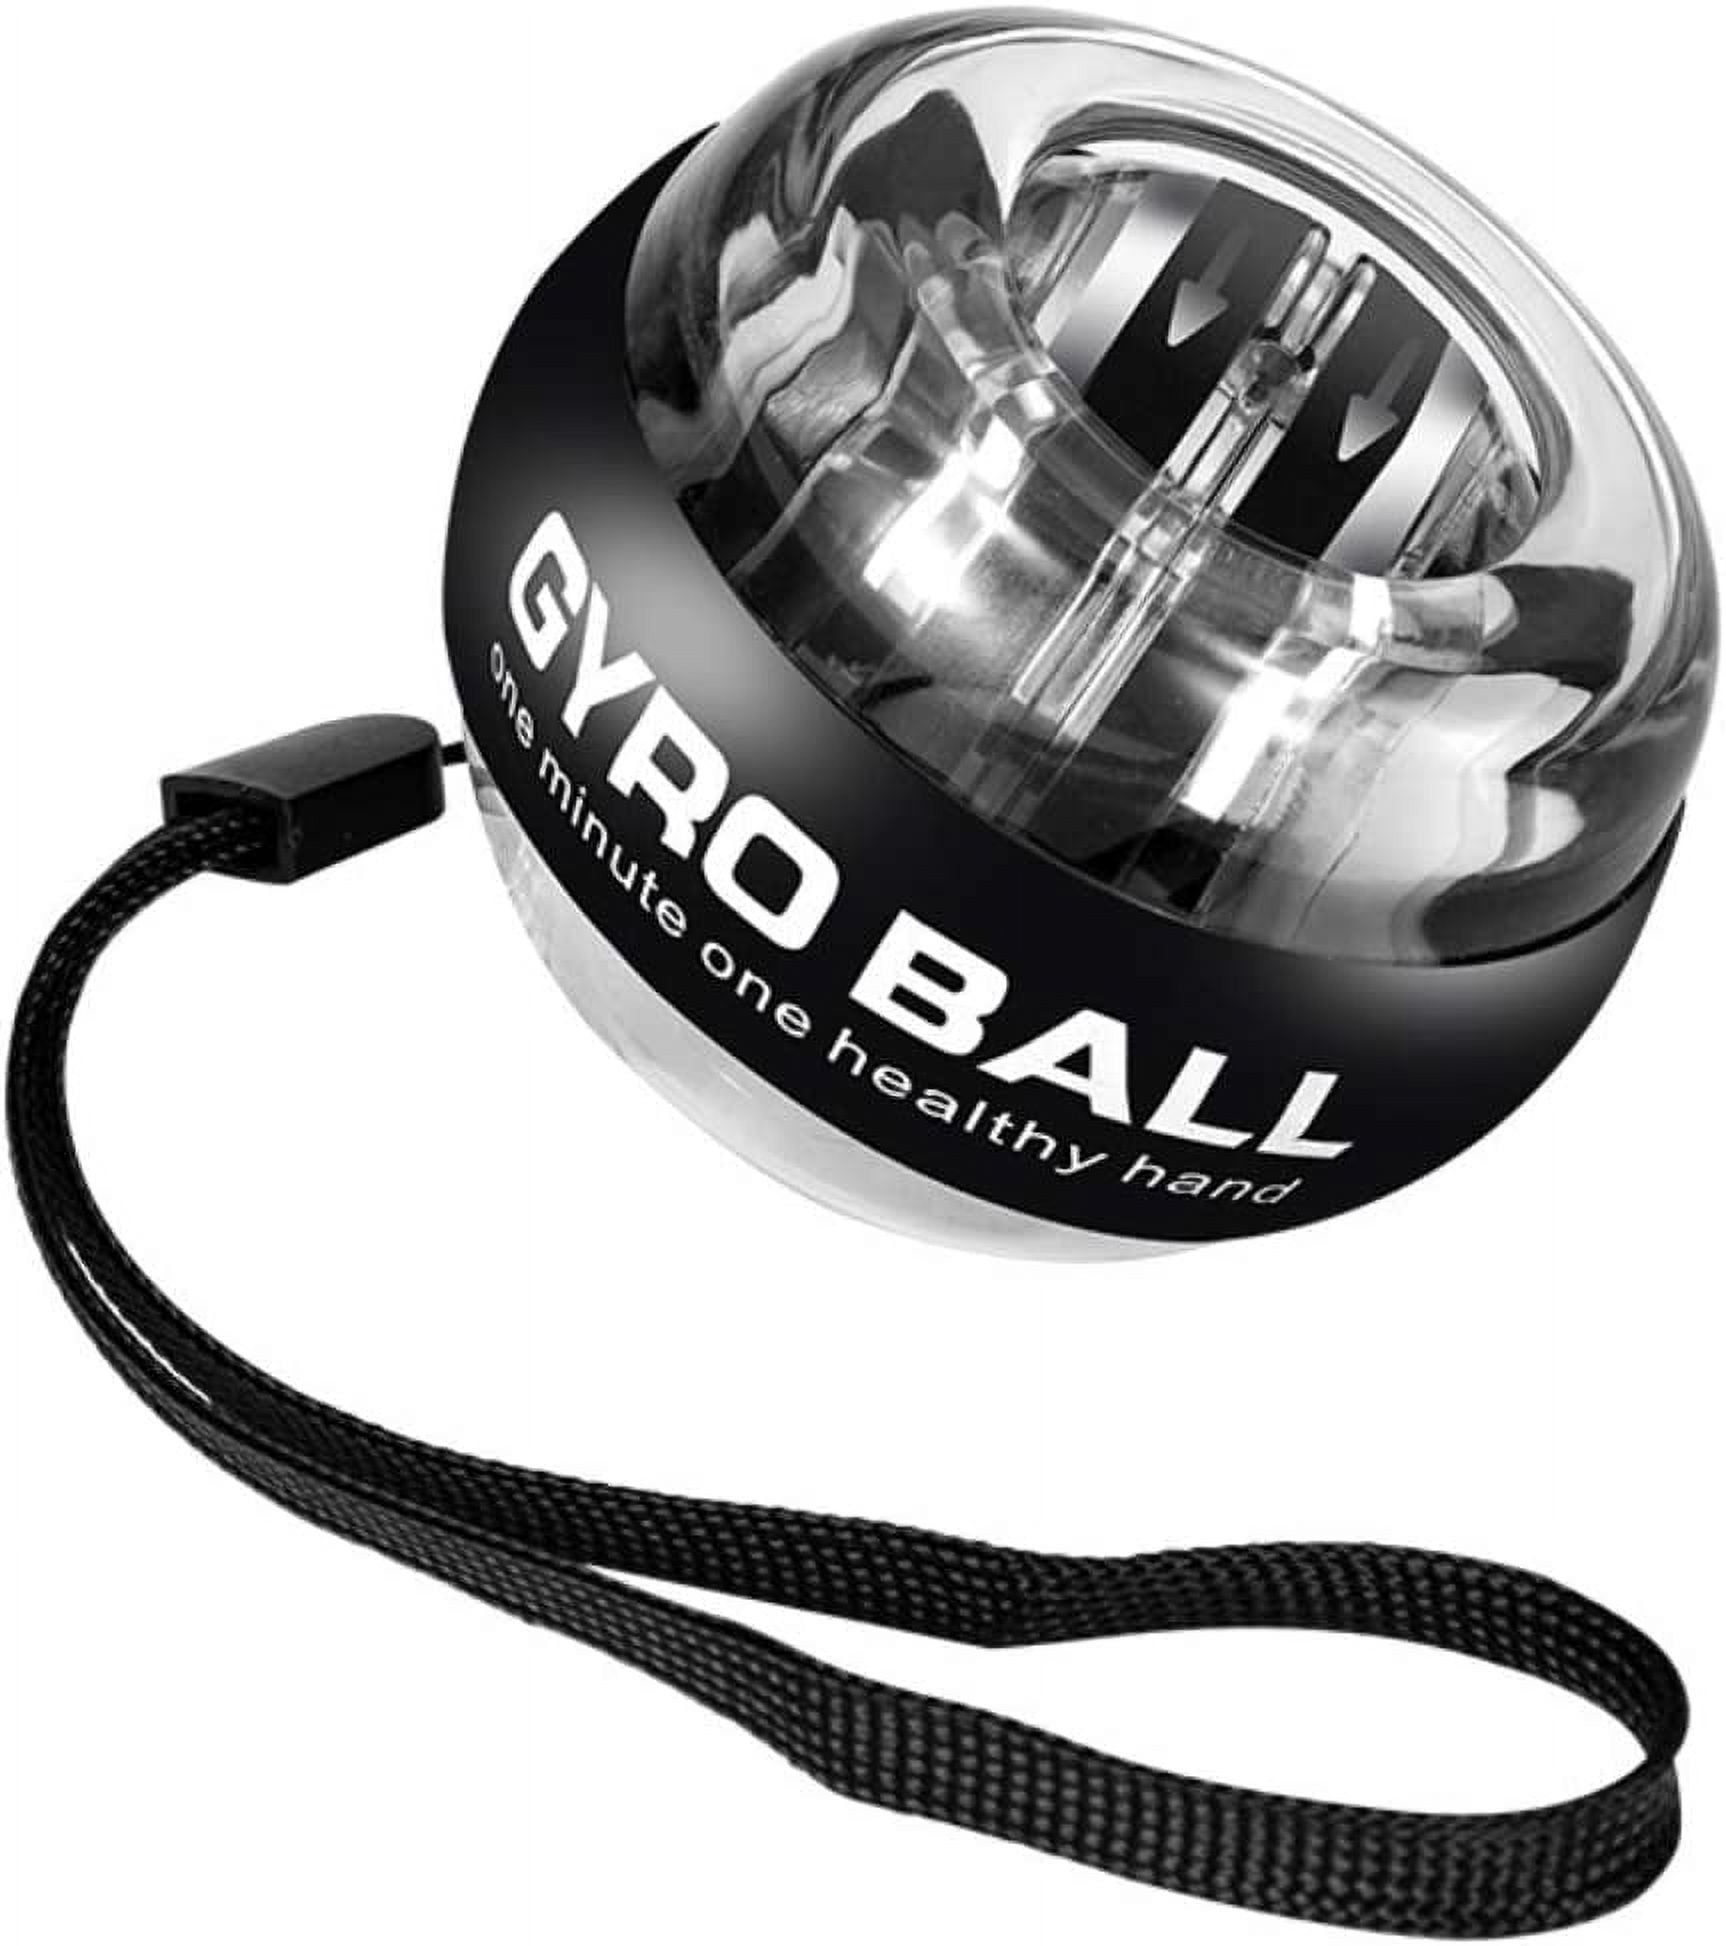 Auto-Start LED Power Gyro Force Wrist Hand Ball Arm Exerciser Relieve  Pressure (without Light) 